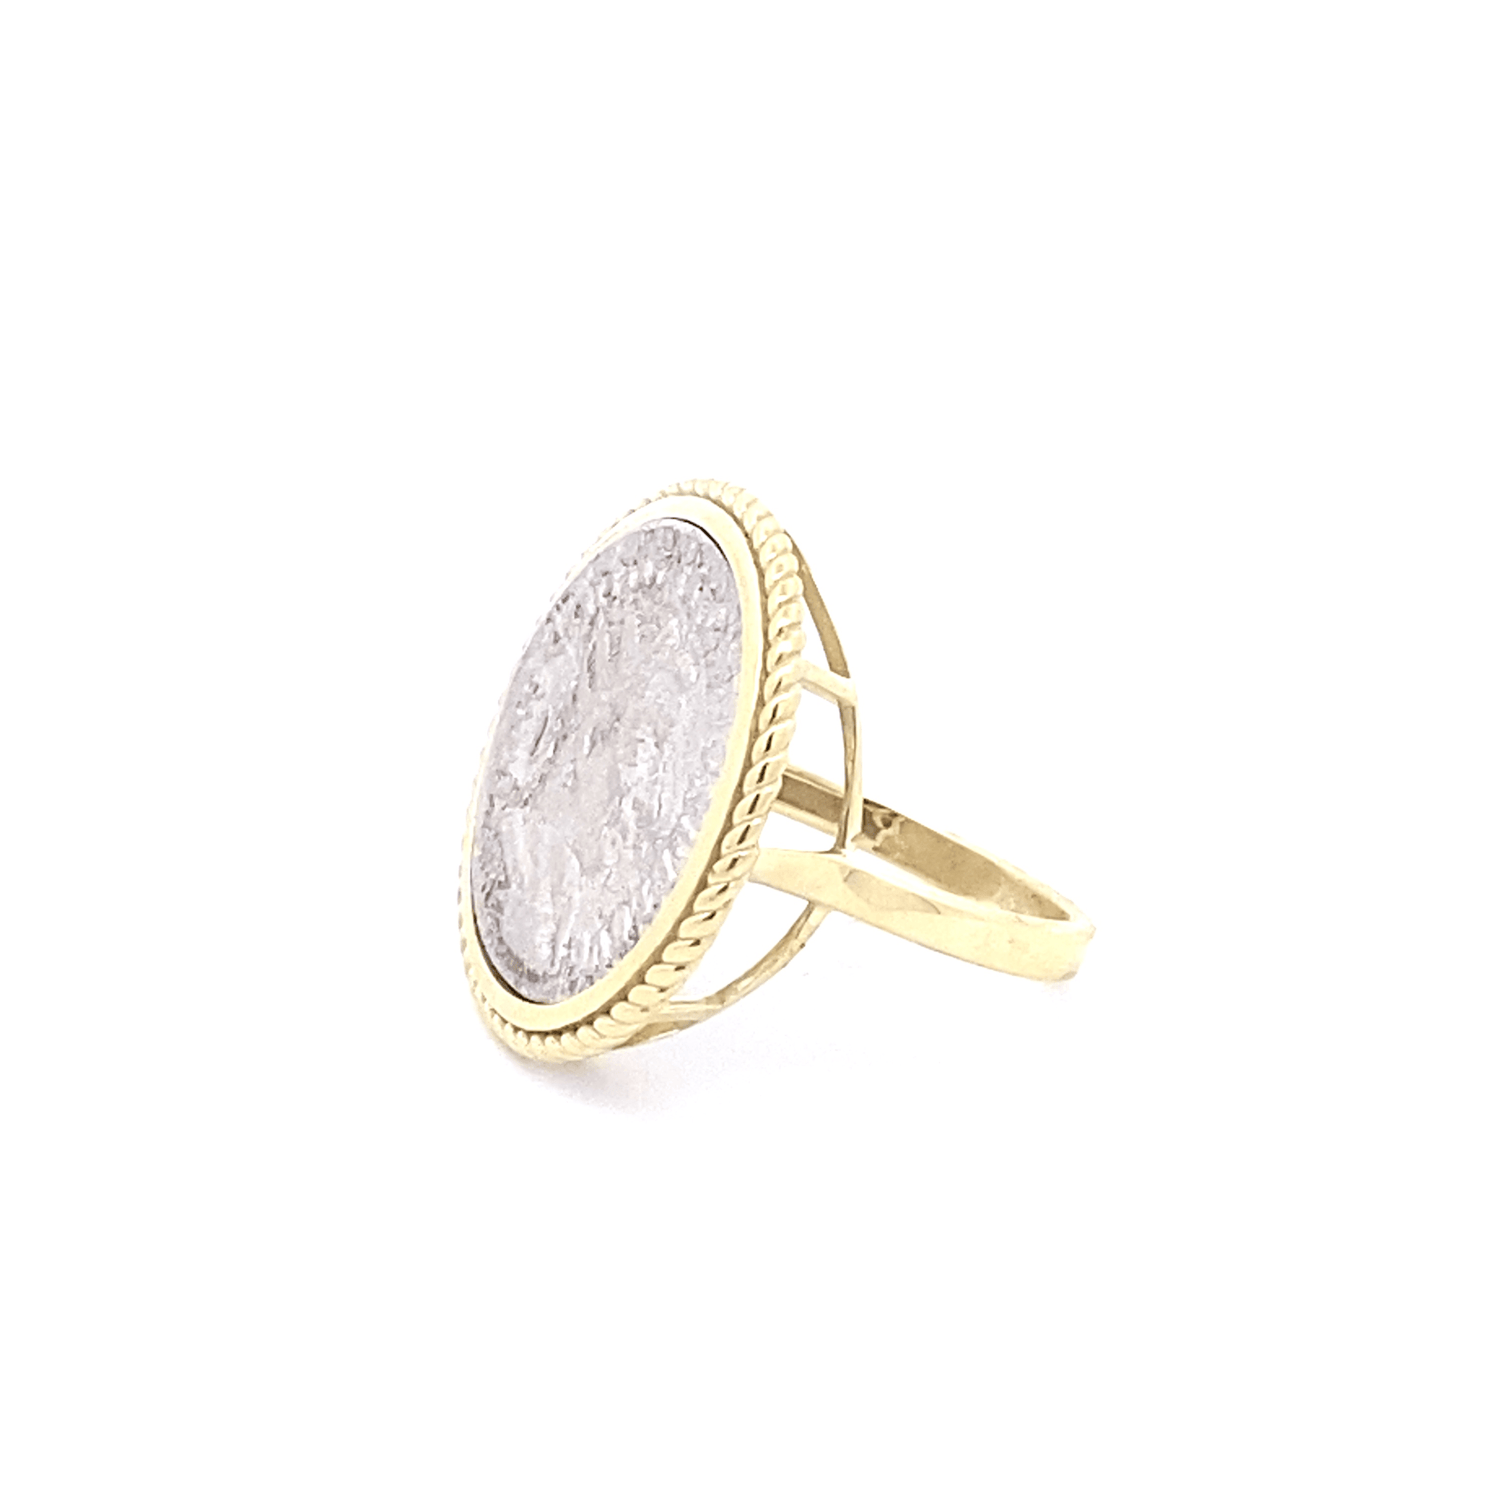 Ring ancient coin in braid bezel - Gaines Jewelers